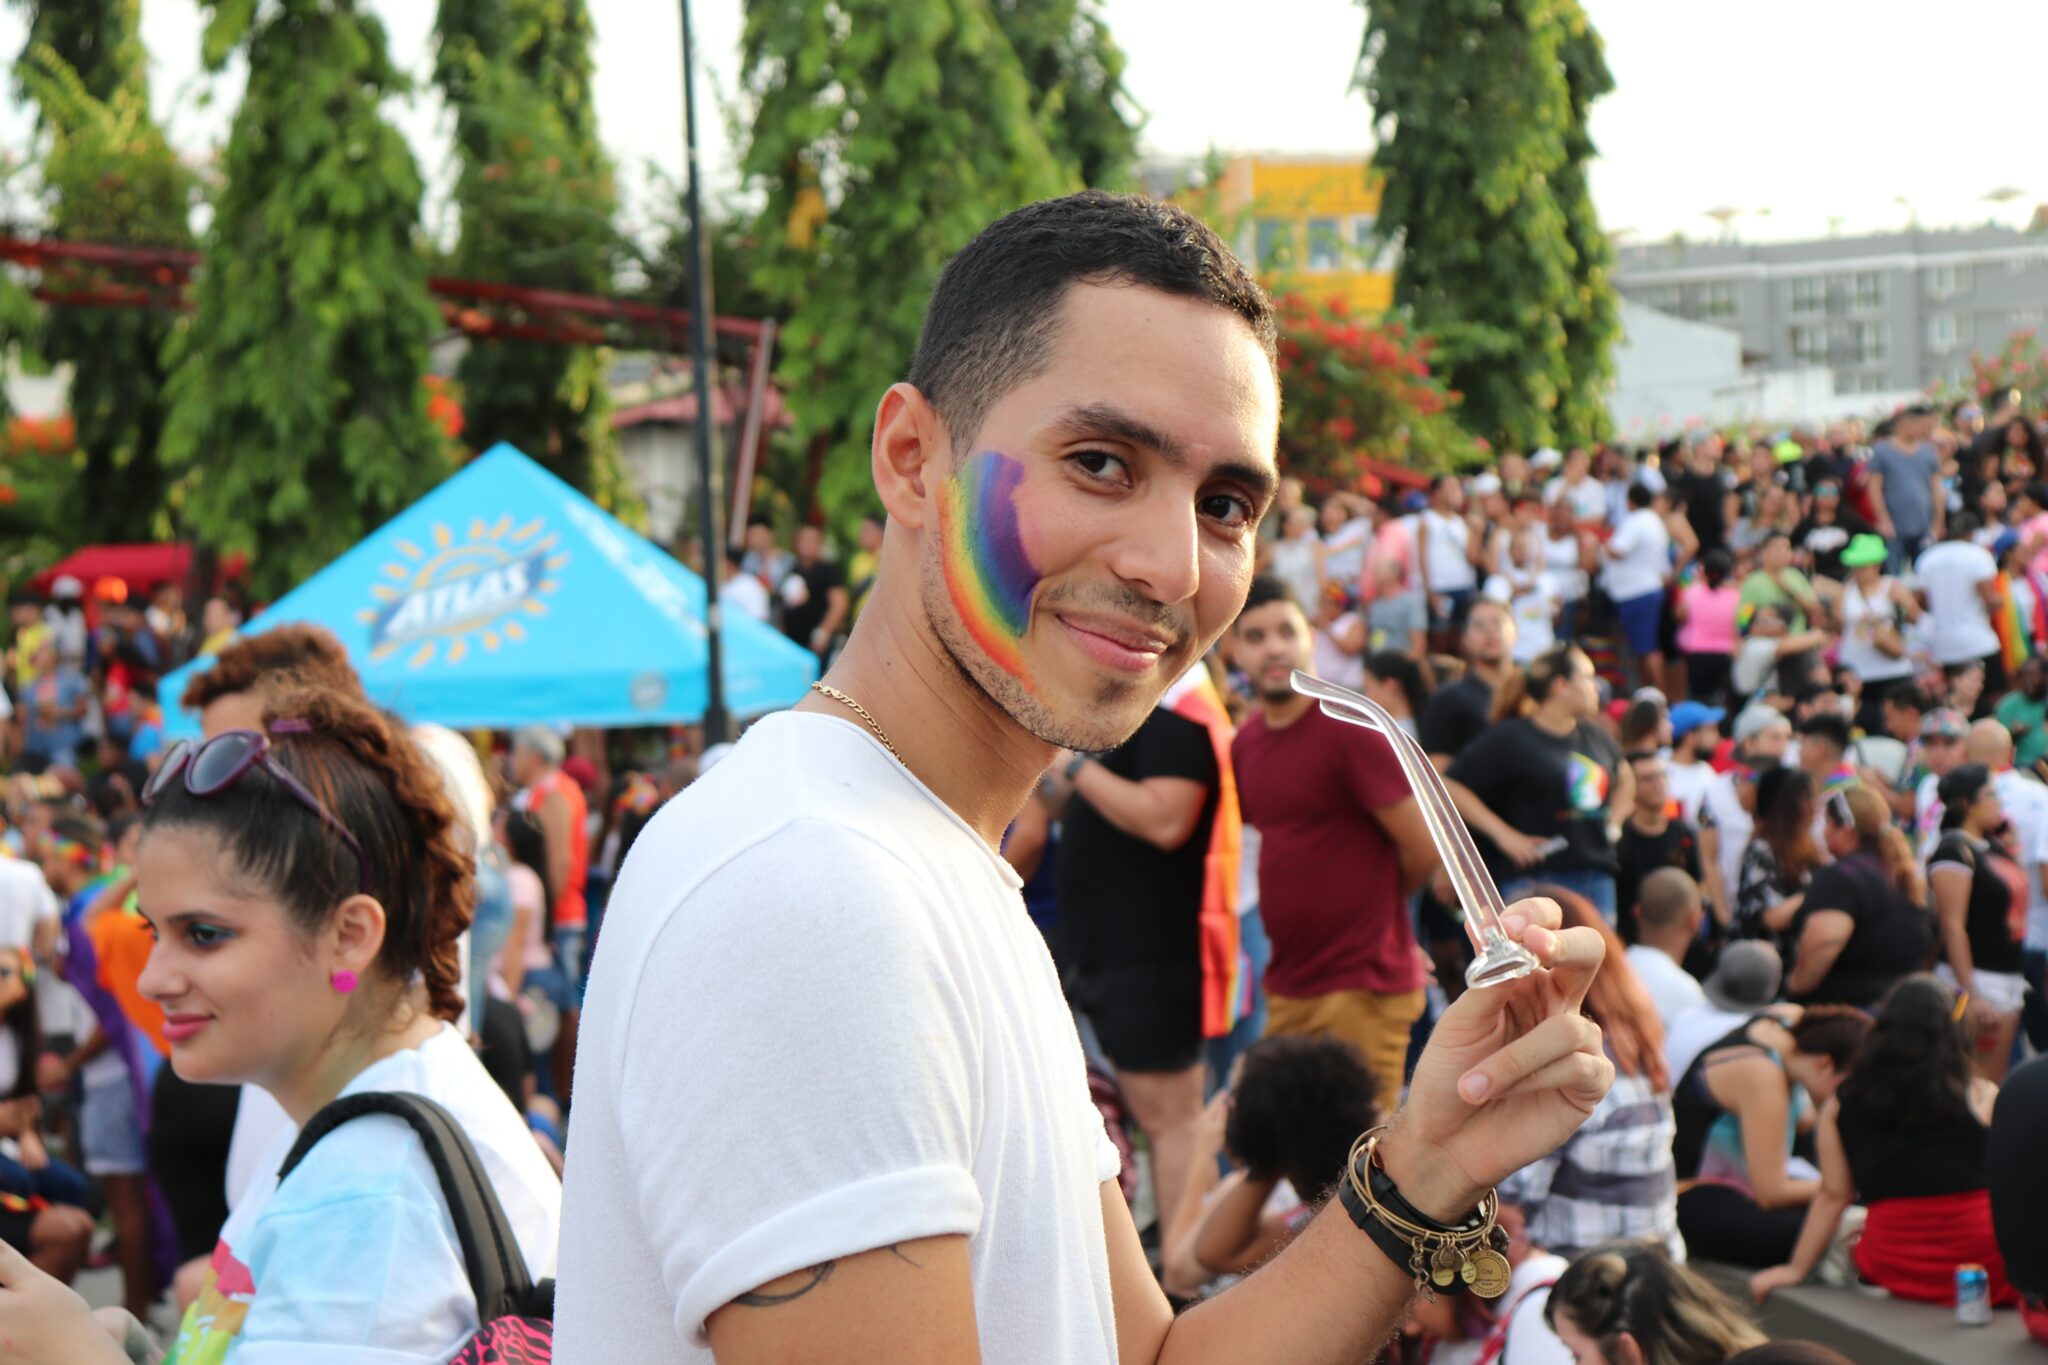 A man at a Pride event with a rainbow painted on his cheek.